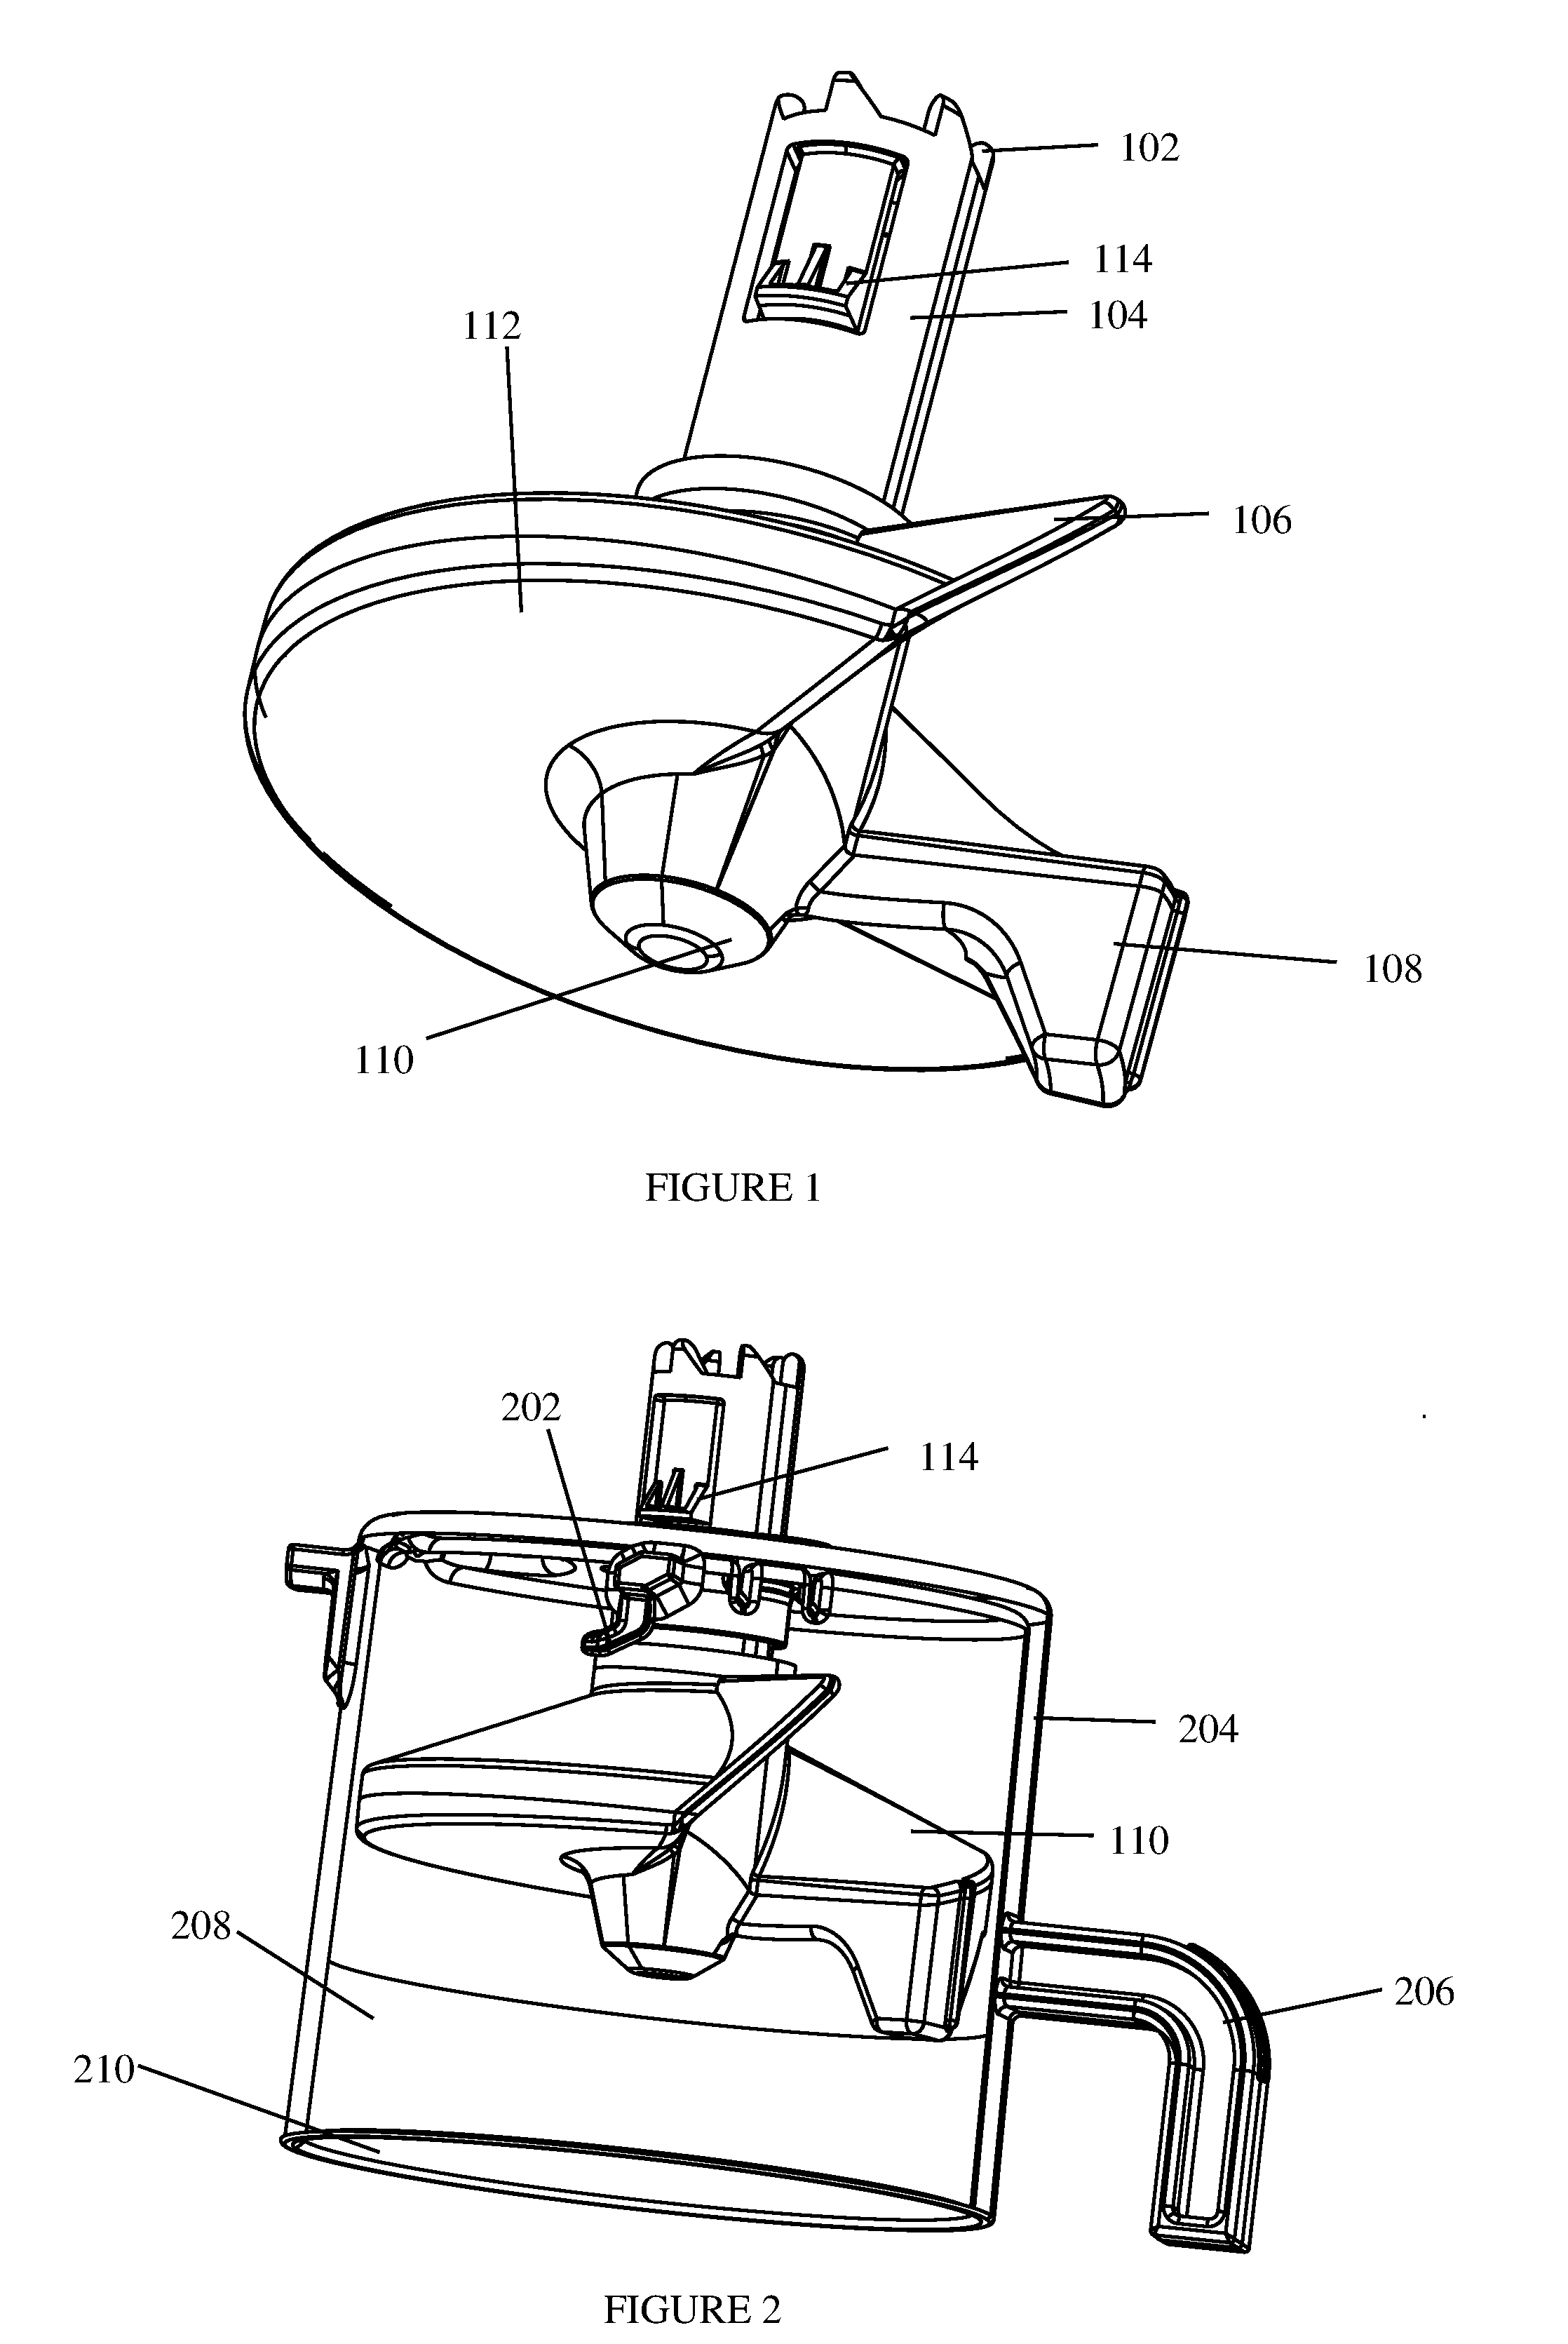 Method for an adaptive kneading technology for a food preparation appliance